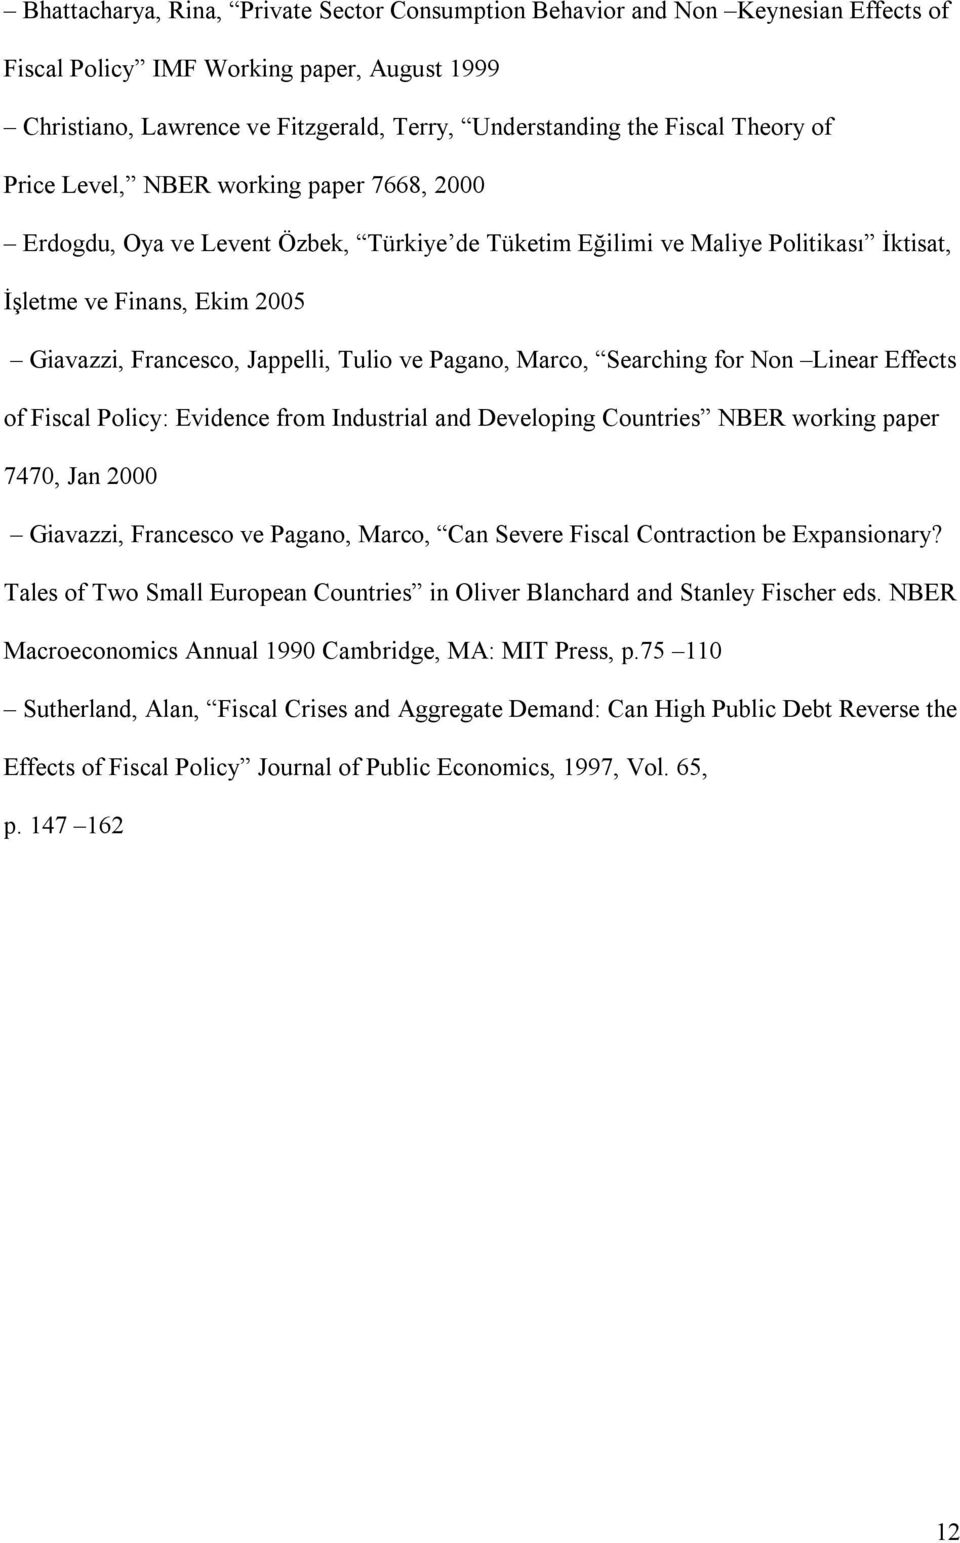 Pagano, Marco, Searching for Non Linear Effecs of Fiscal Policy: Evidence from Indusrial and Developing Counries NBER working paper 7470, Jan 2000 Giavazzi, Francesco ve Pagano, Marco, Can Severe